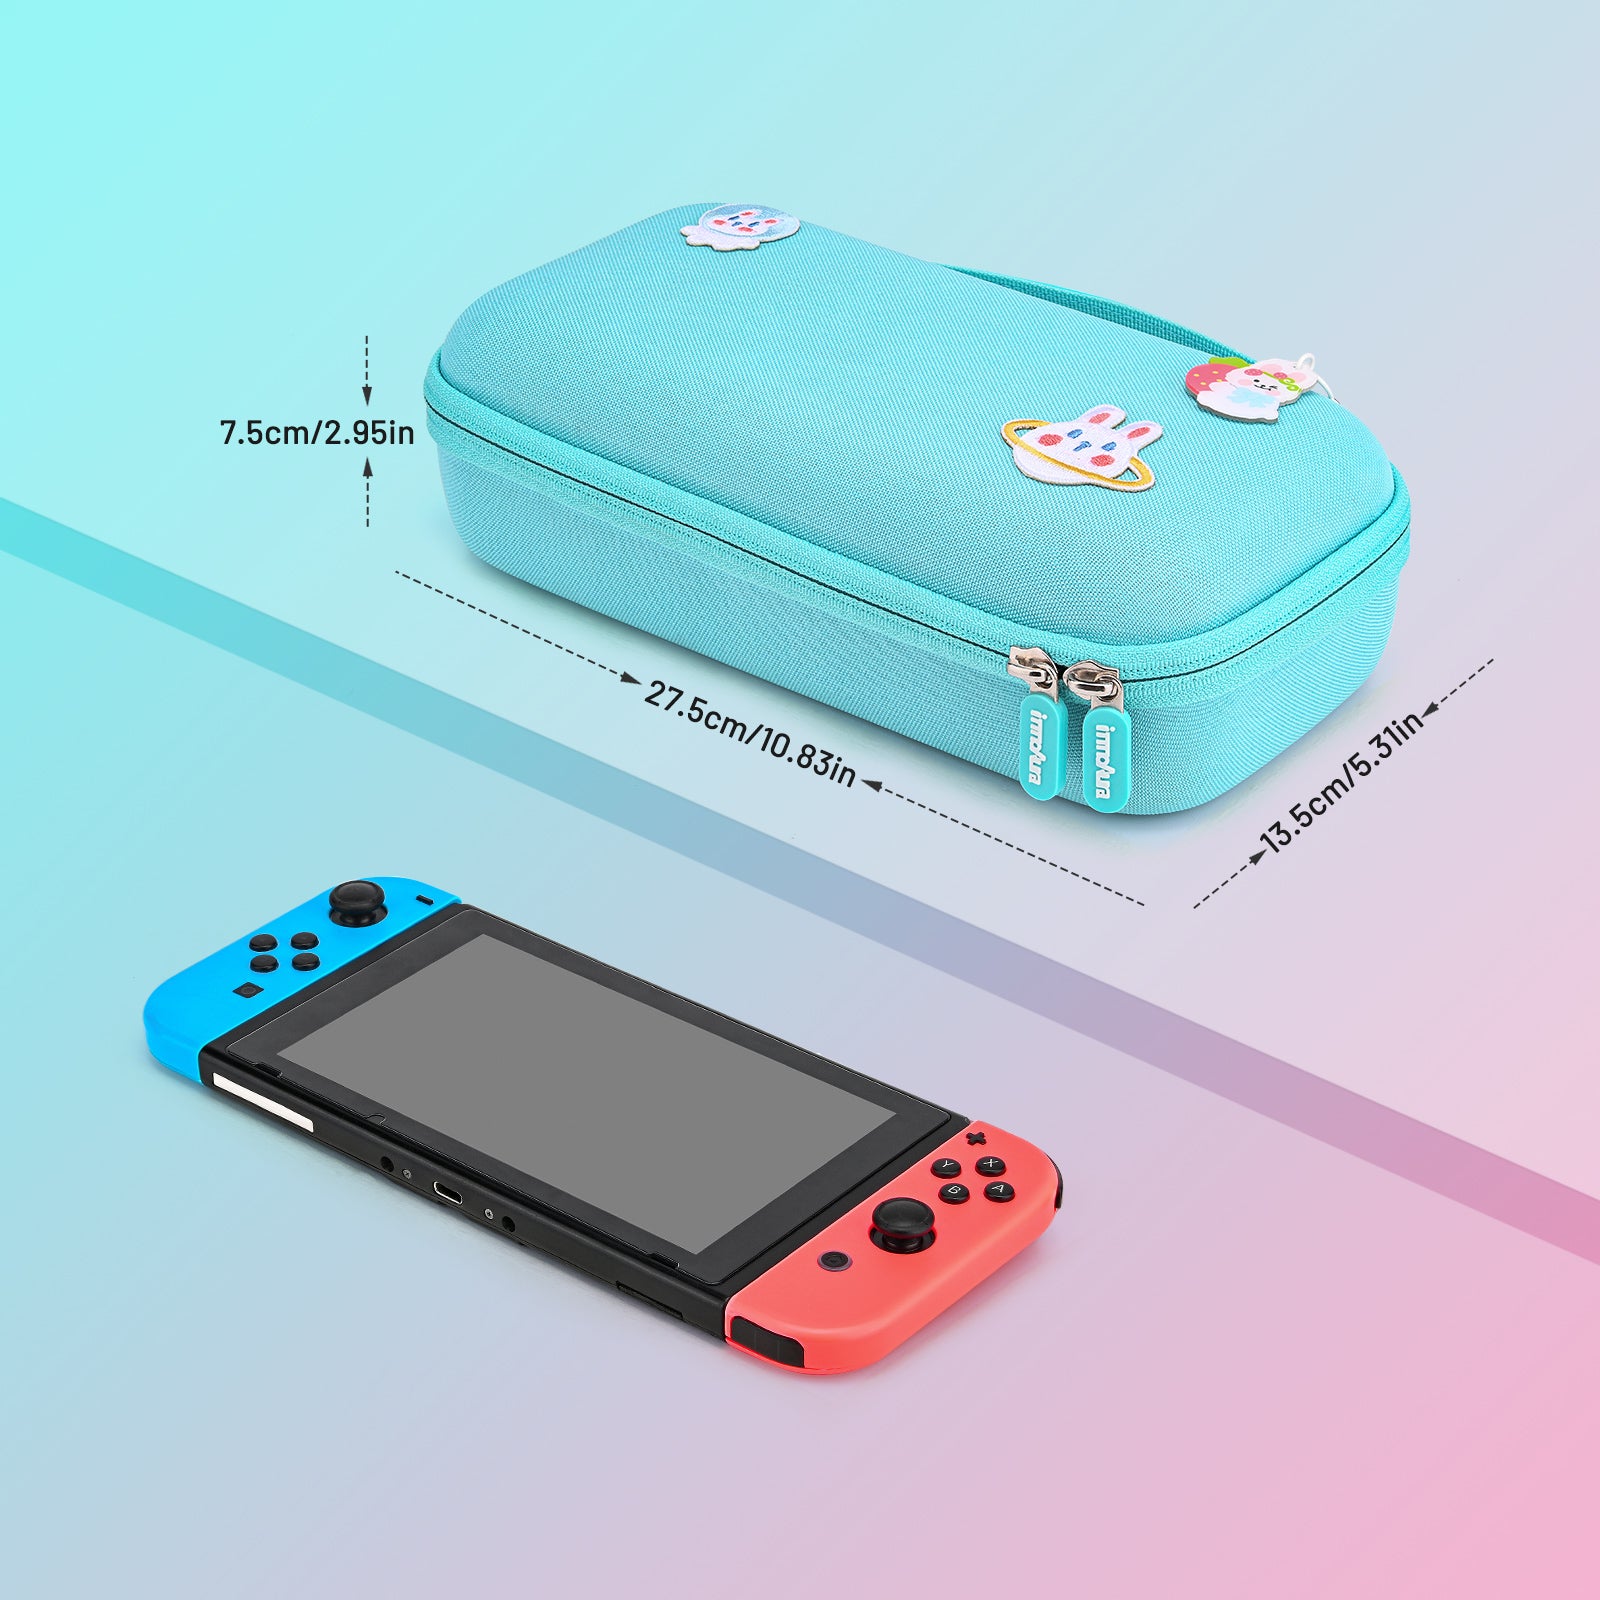 innoAura Switch Case Hard Carrying Case for Nintendo Switch with 18 Accessories